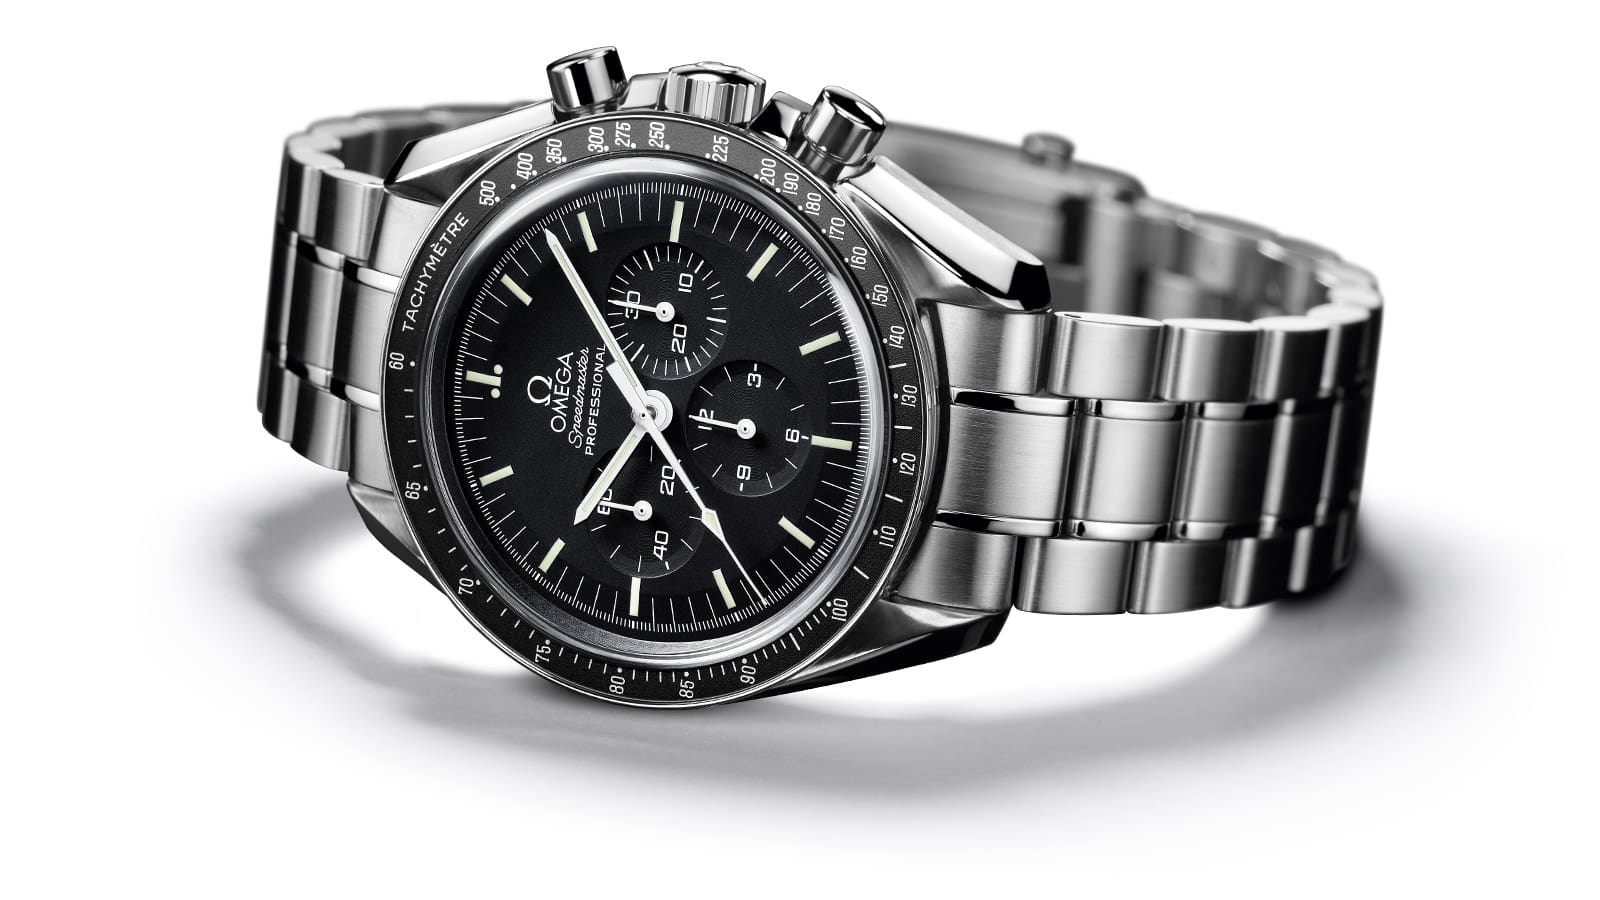 RECOMMENDED WATCHING: How NASA tested the Omega Speedmaster